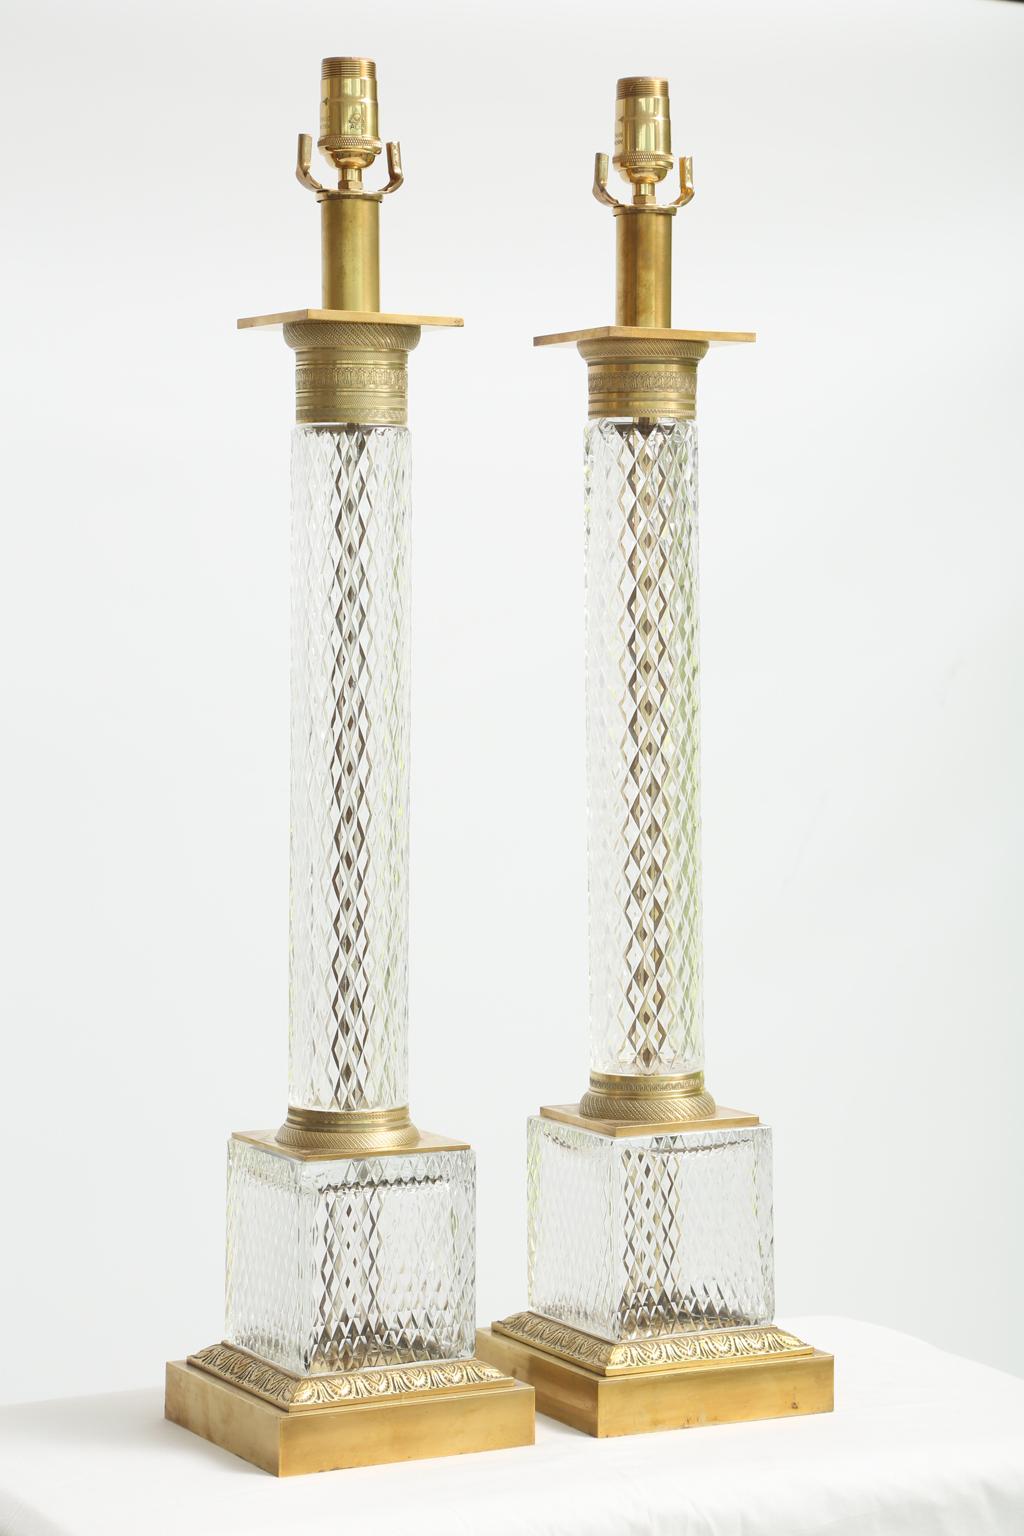 Pair of large scale table lamps, each a diamond-pattern cut glass column, with chased capital and foot of gilt bronze, on matching glass plinth, upon bronze doré base, decorated with classical palmette motifs. 

Stock ID: D2183